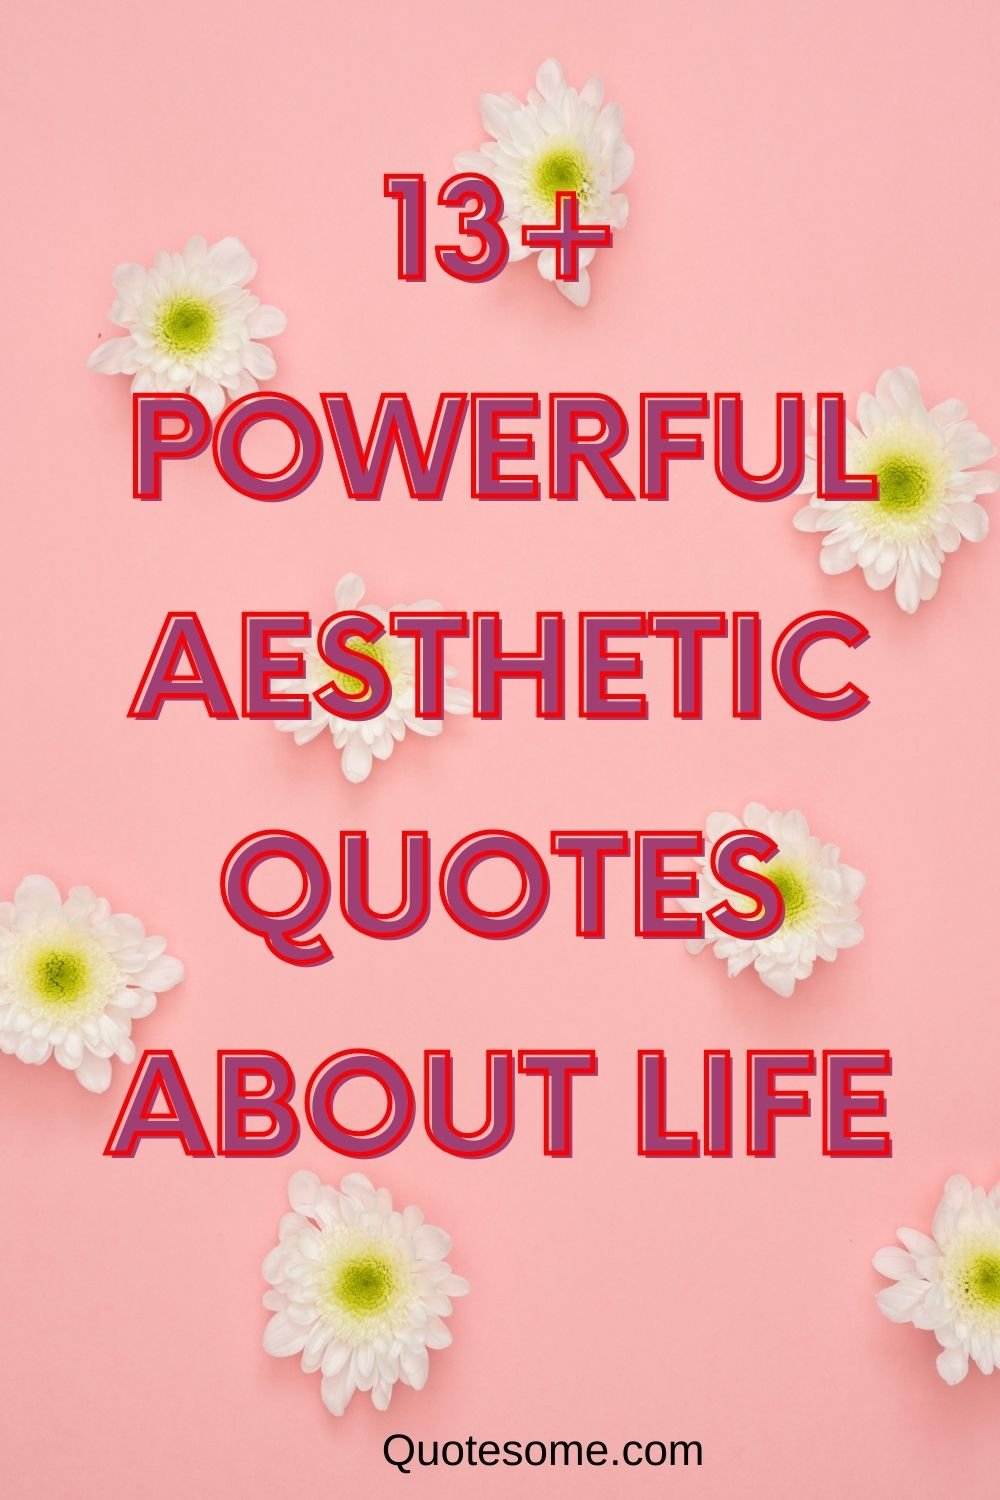 13+ POWERFUL AESTHETIC QUOTES ABOUT LIFE